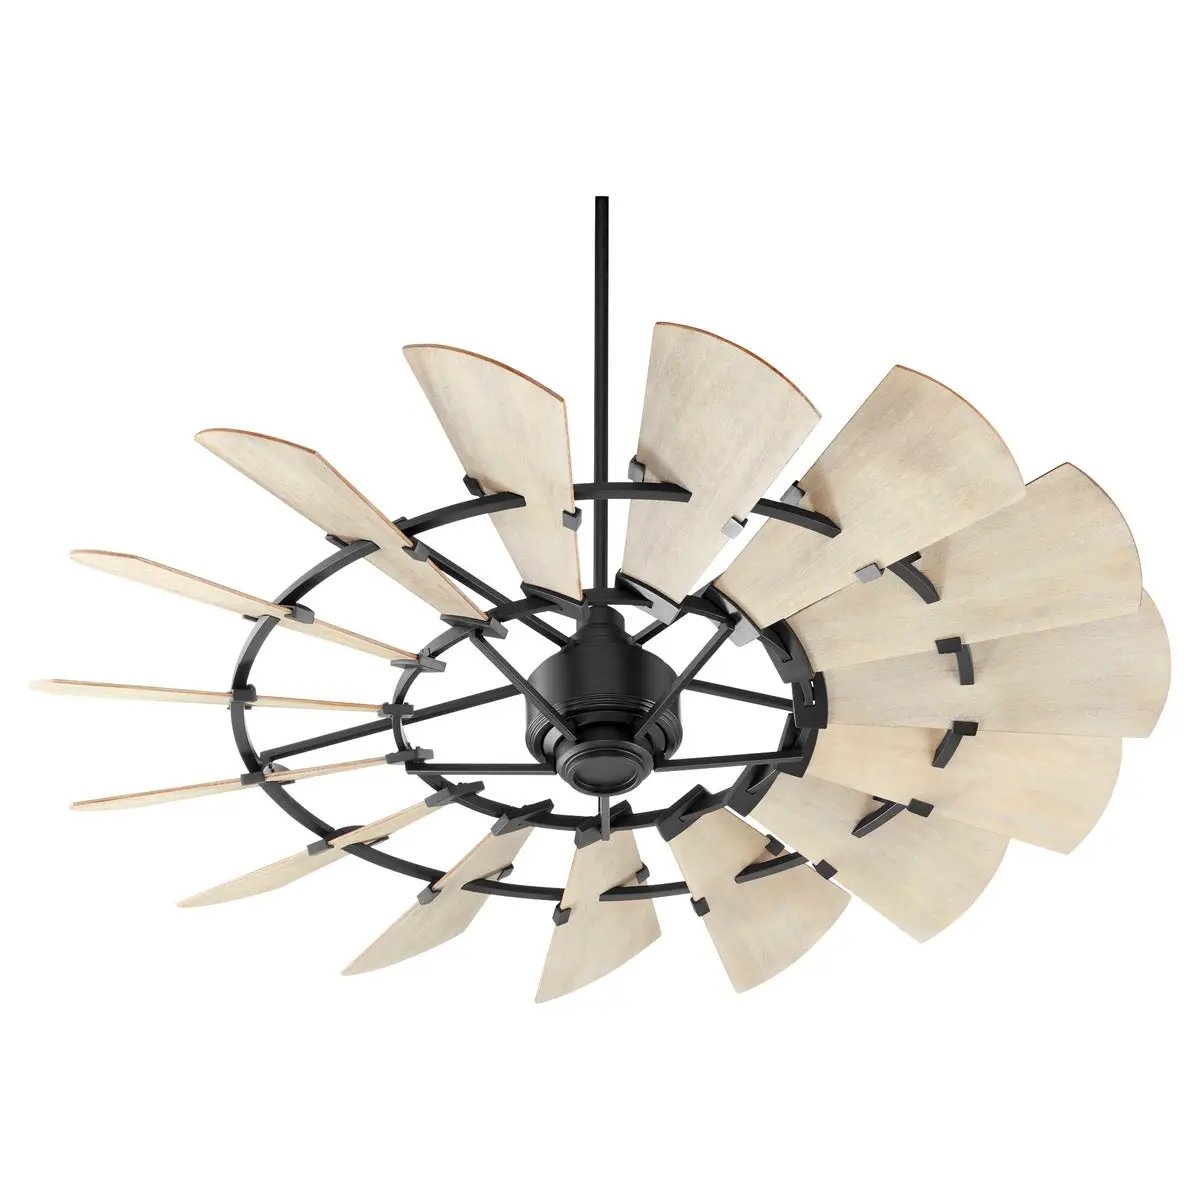 Windmill Ceiling Fan with 15 weathered oak wooden blades, rustic design, and UL Listed certifications. Dimensions: 16.5"H x 60"W.